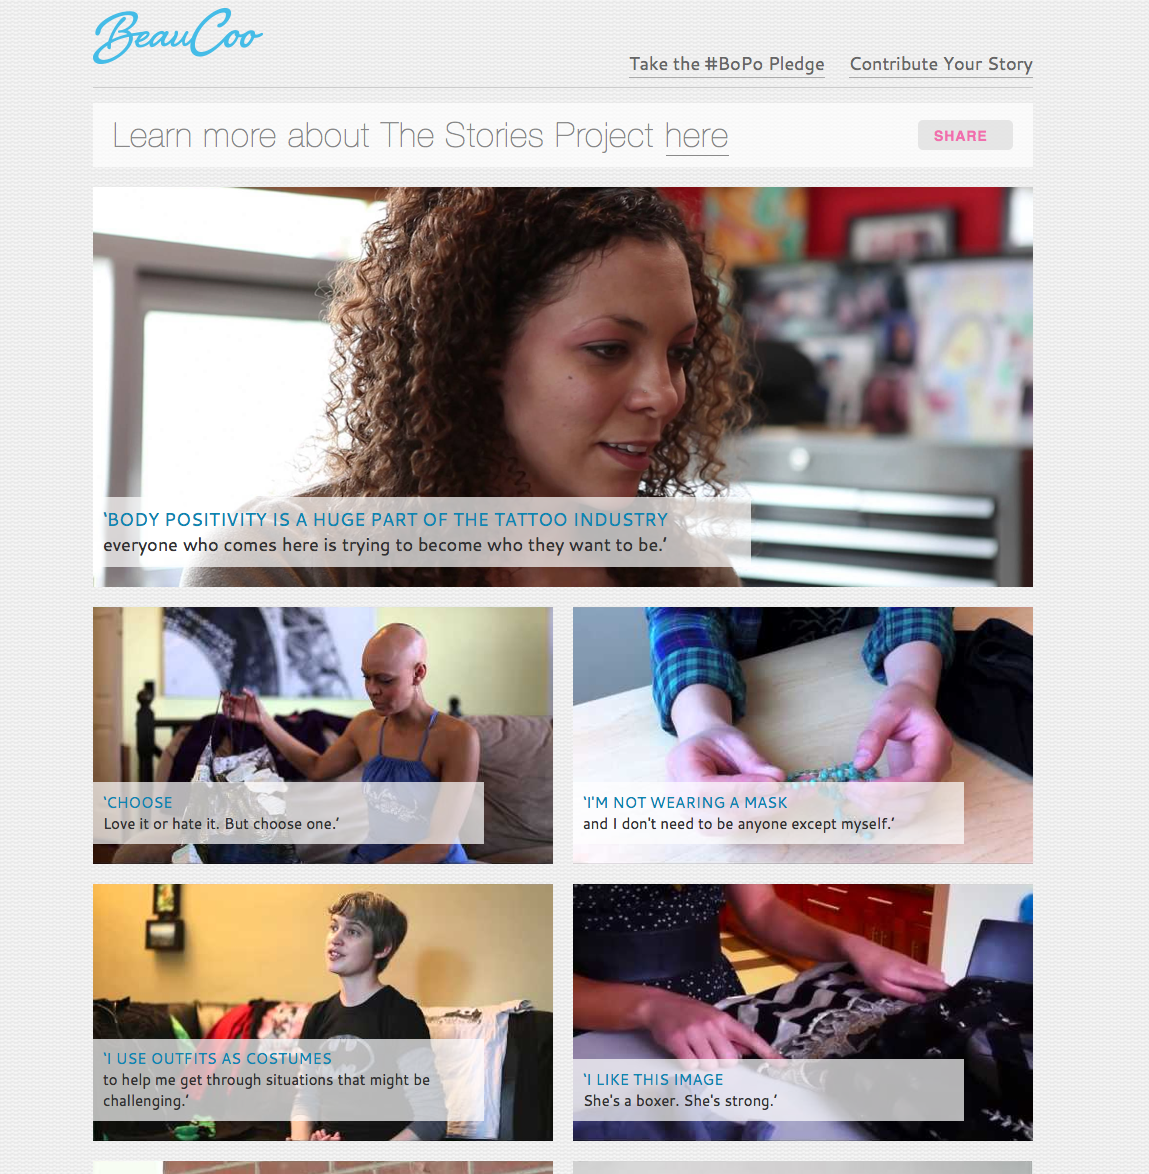 BeauCoo:  The Stories Project